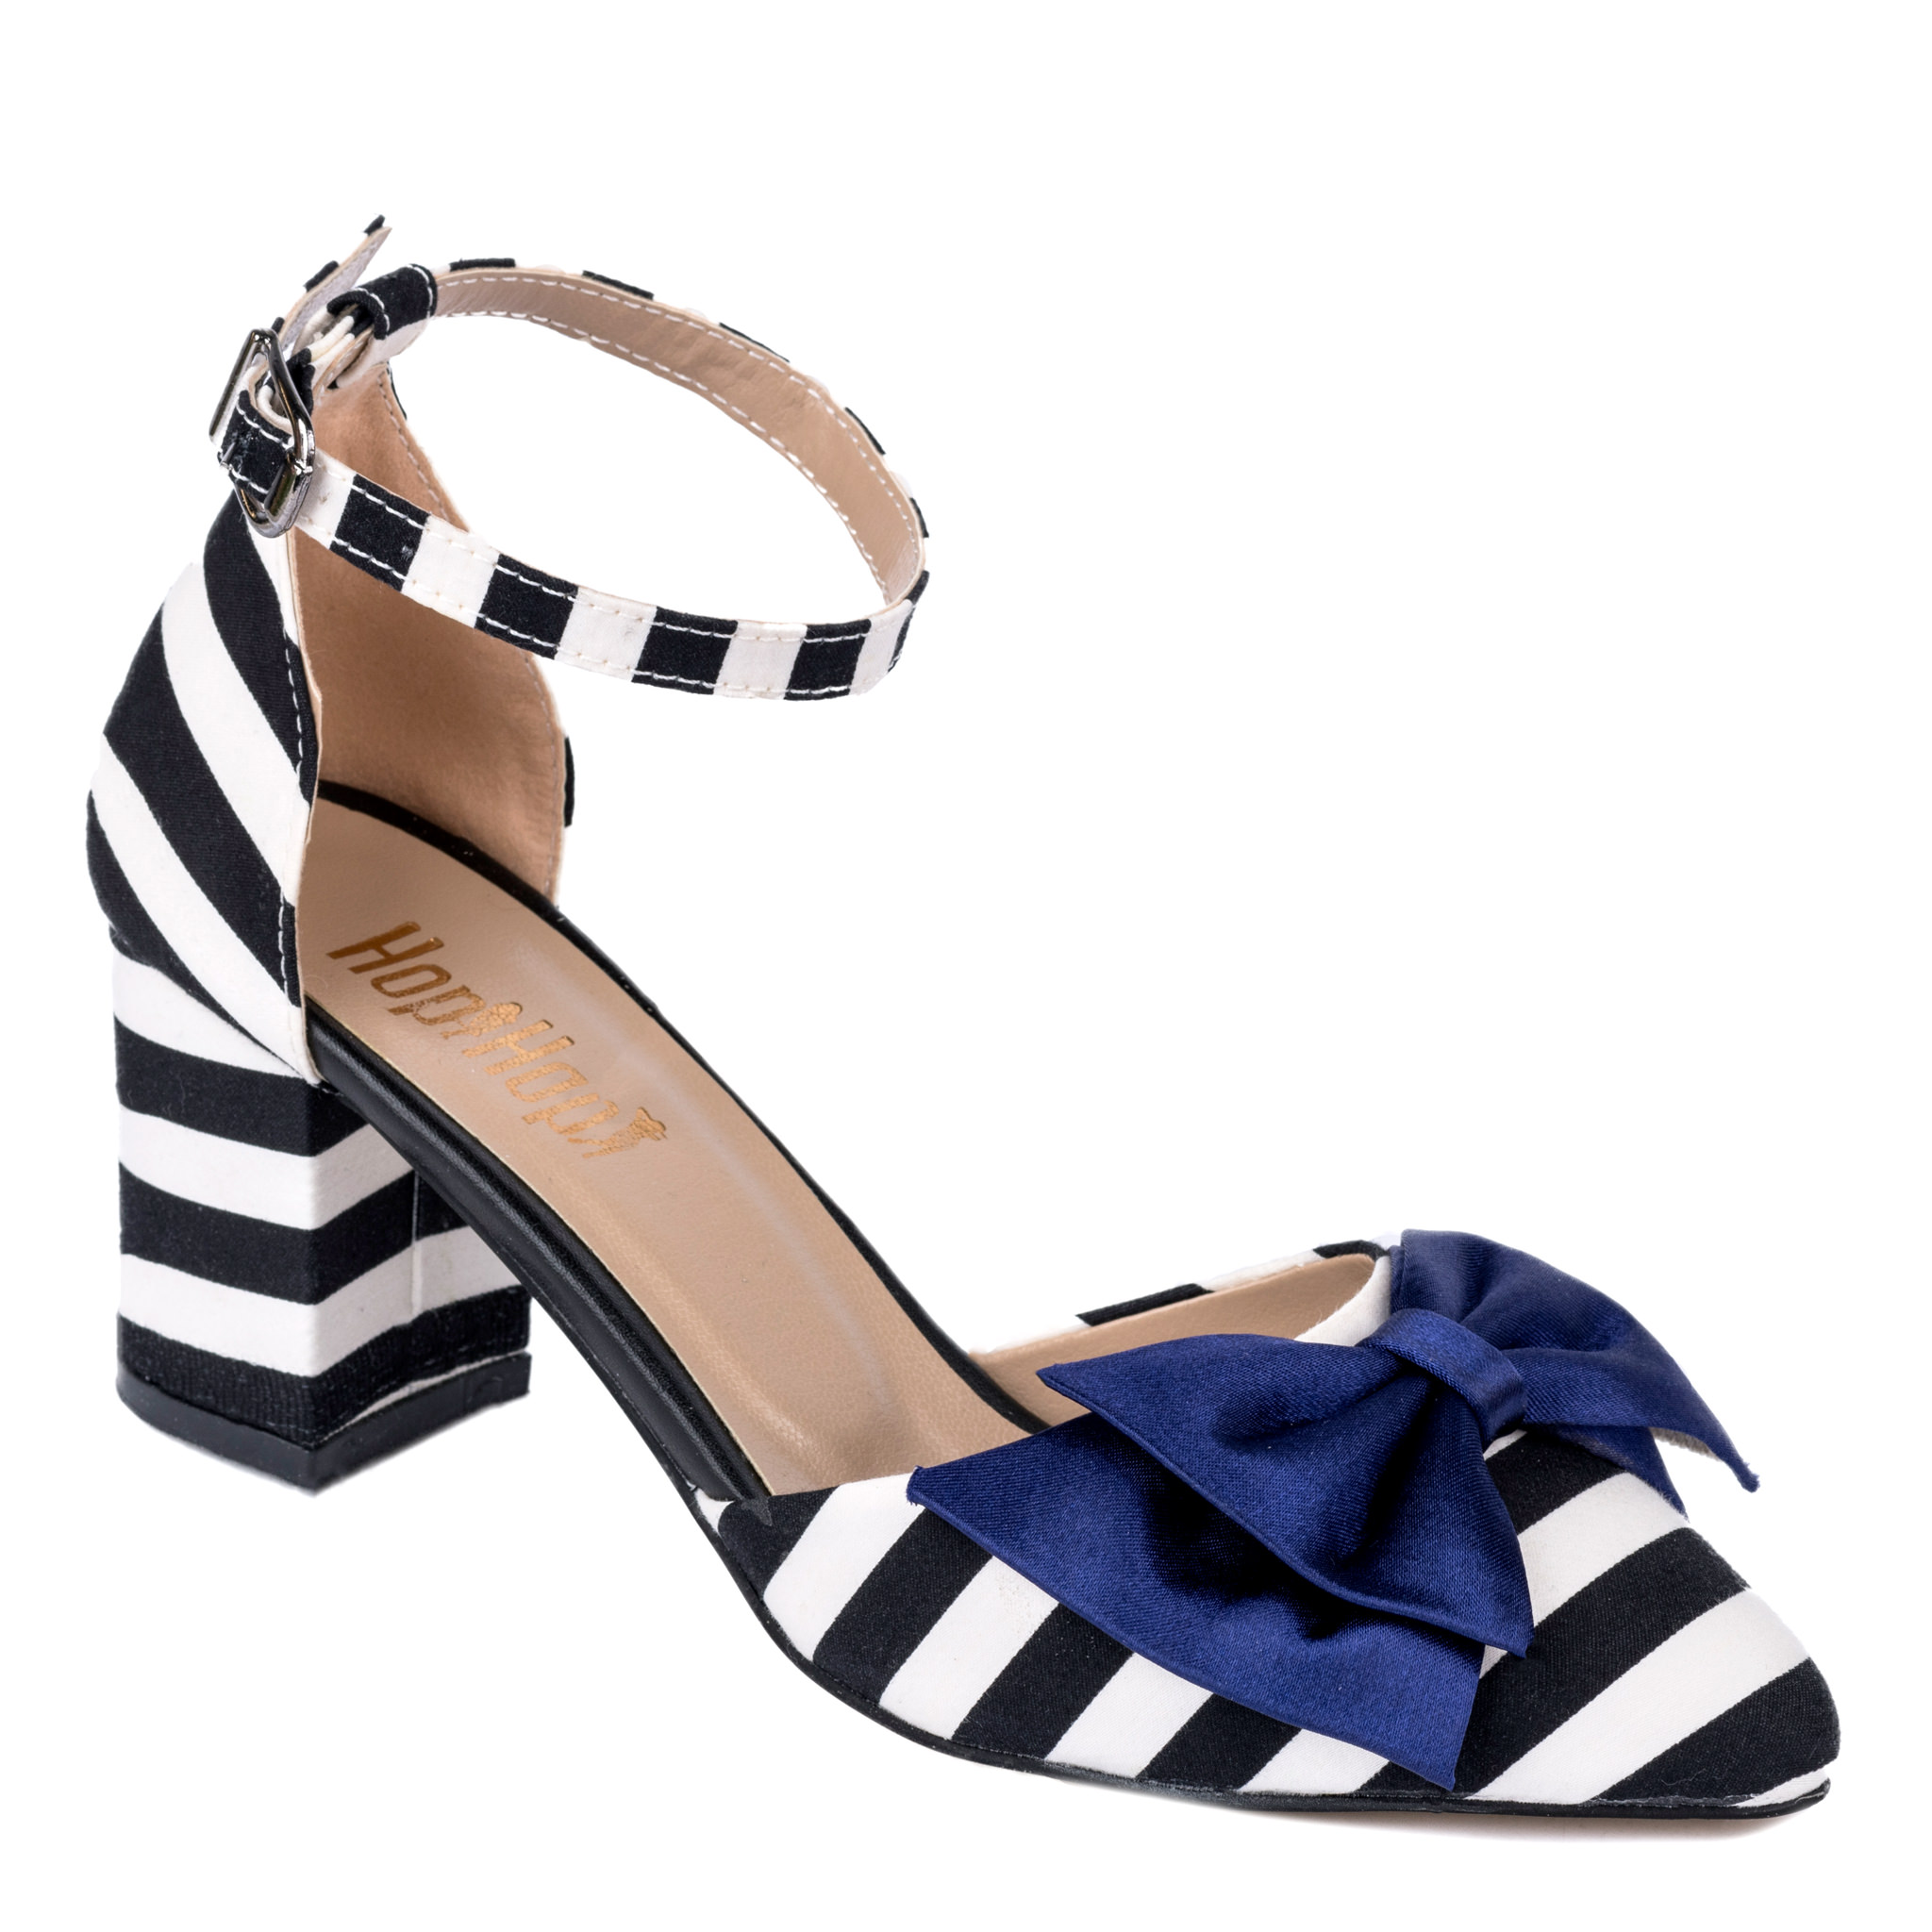 SHOES WITH BLUE BOW AND STRAPES - BLACK/WHITE